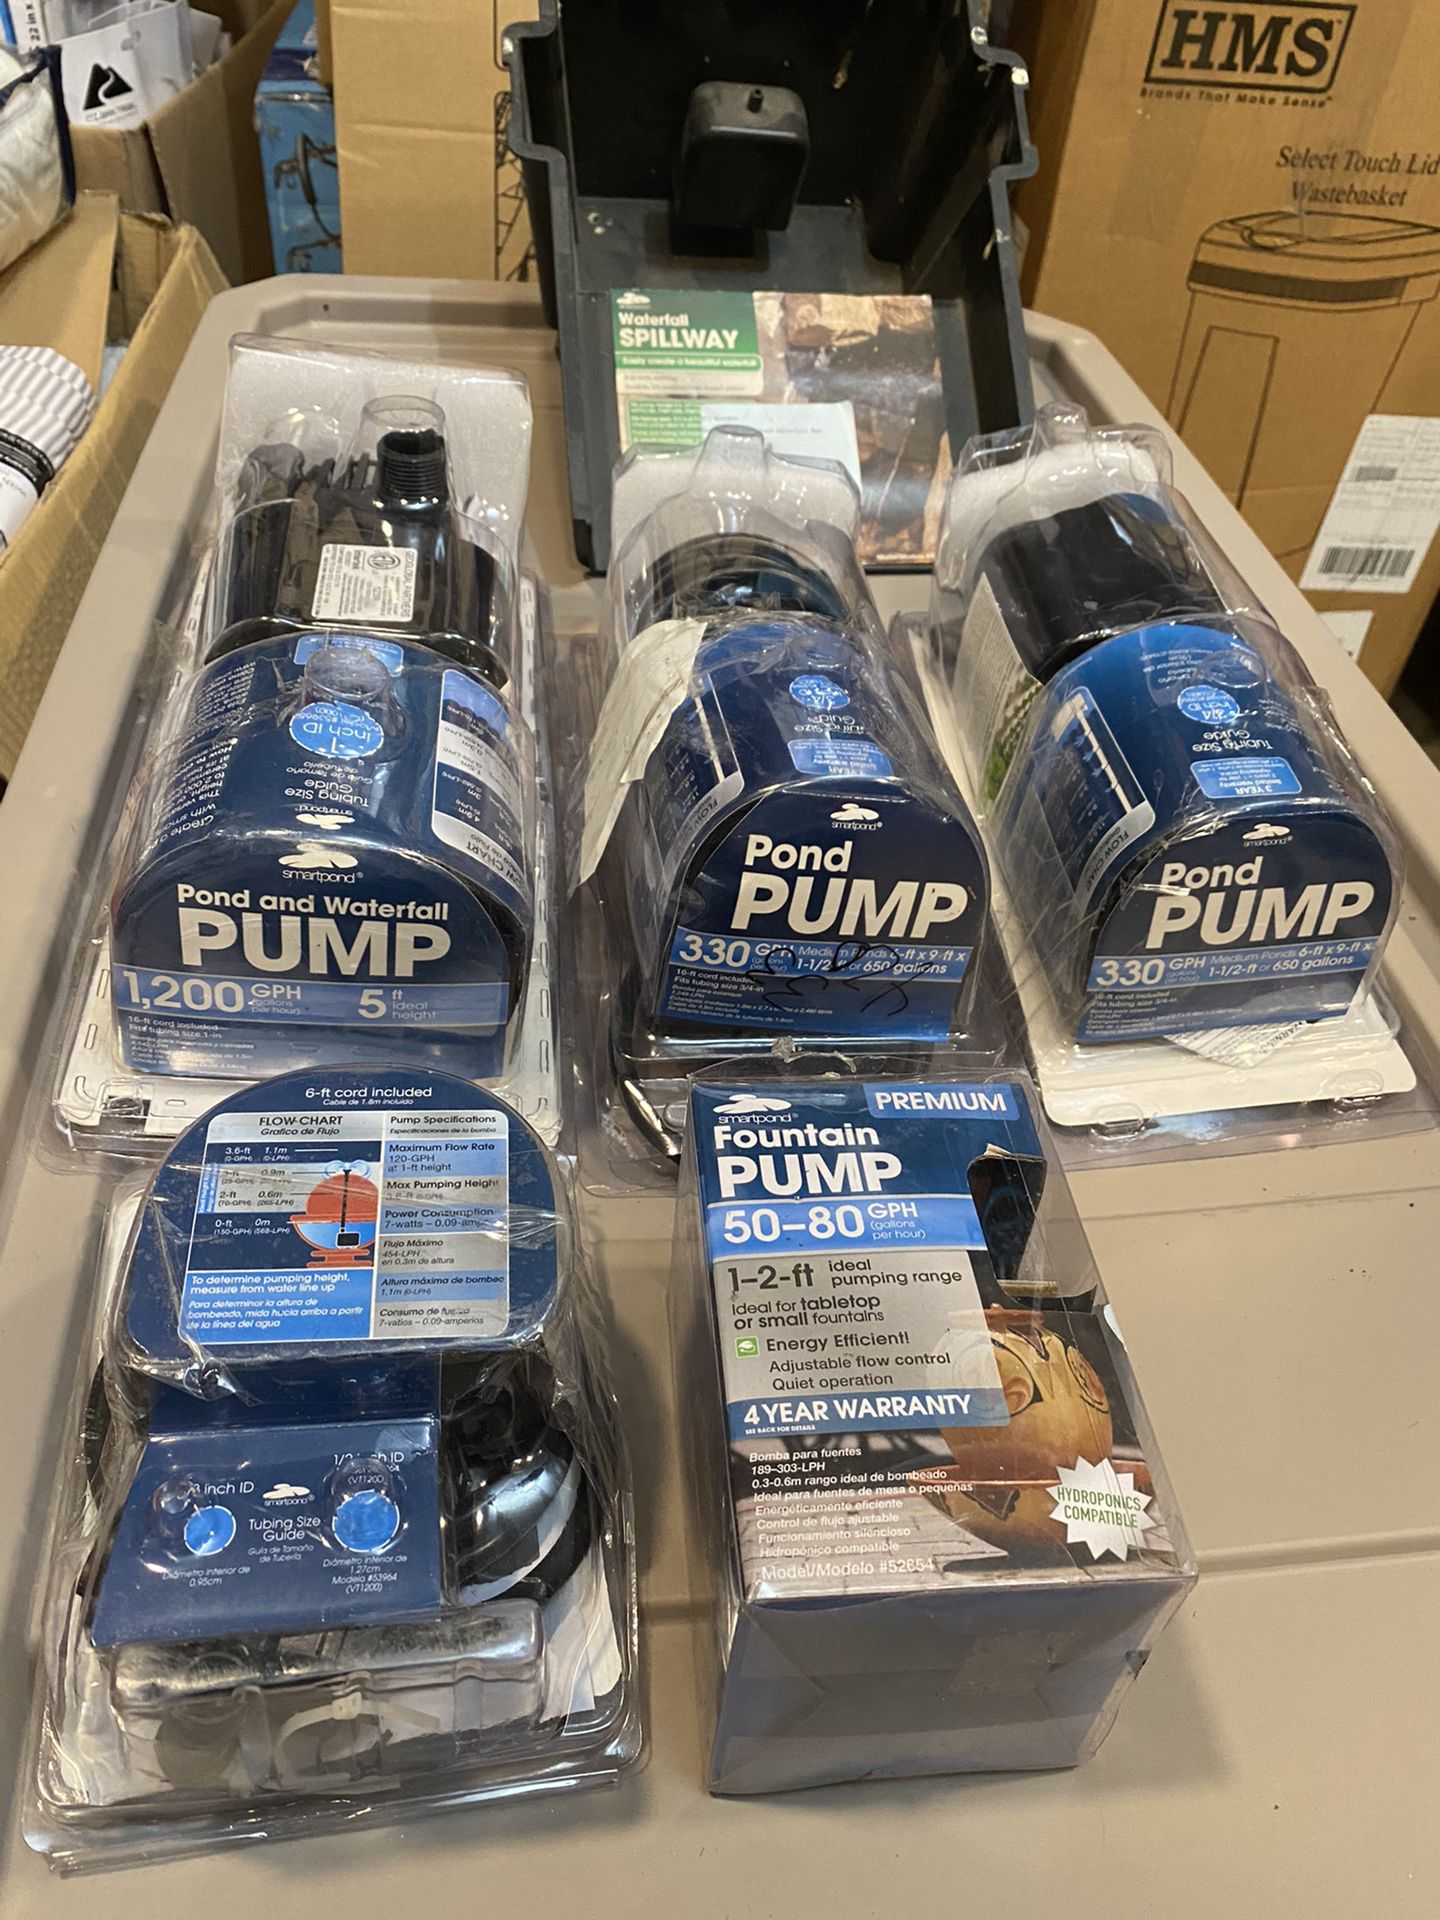 Fountain pump smartpond all for $150